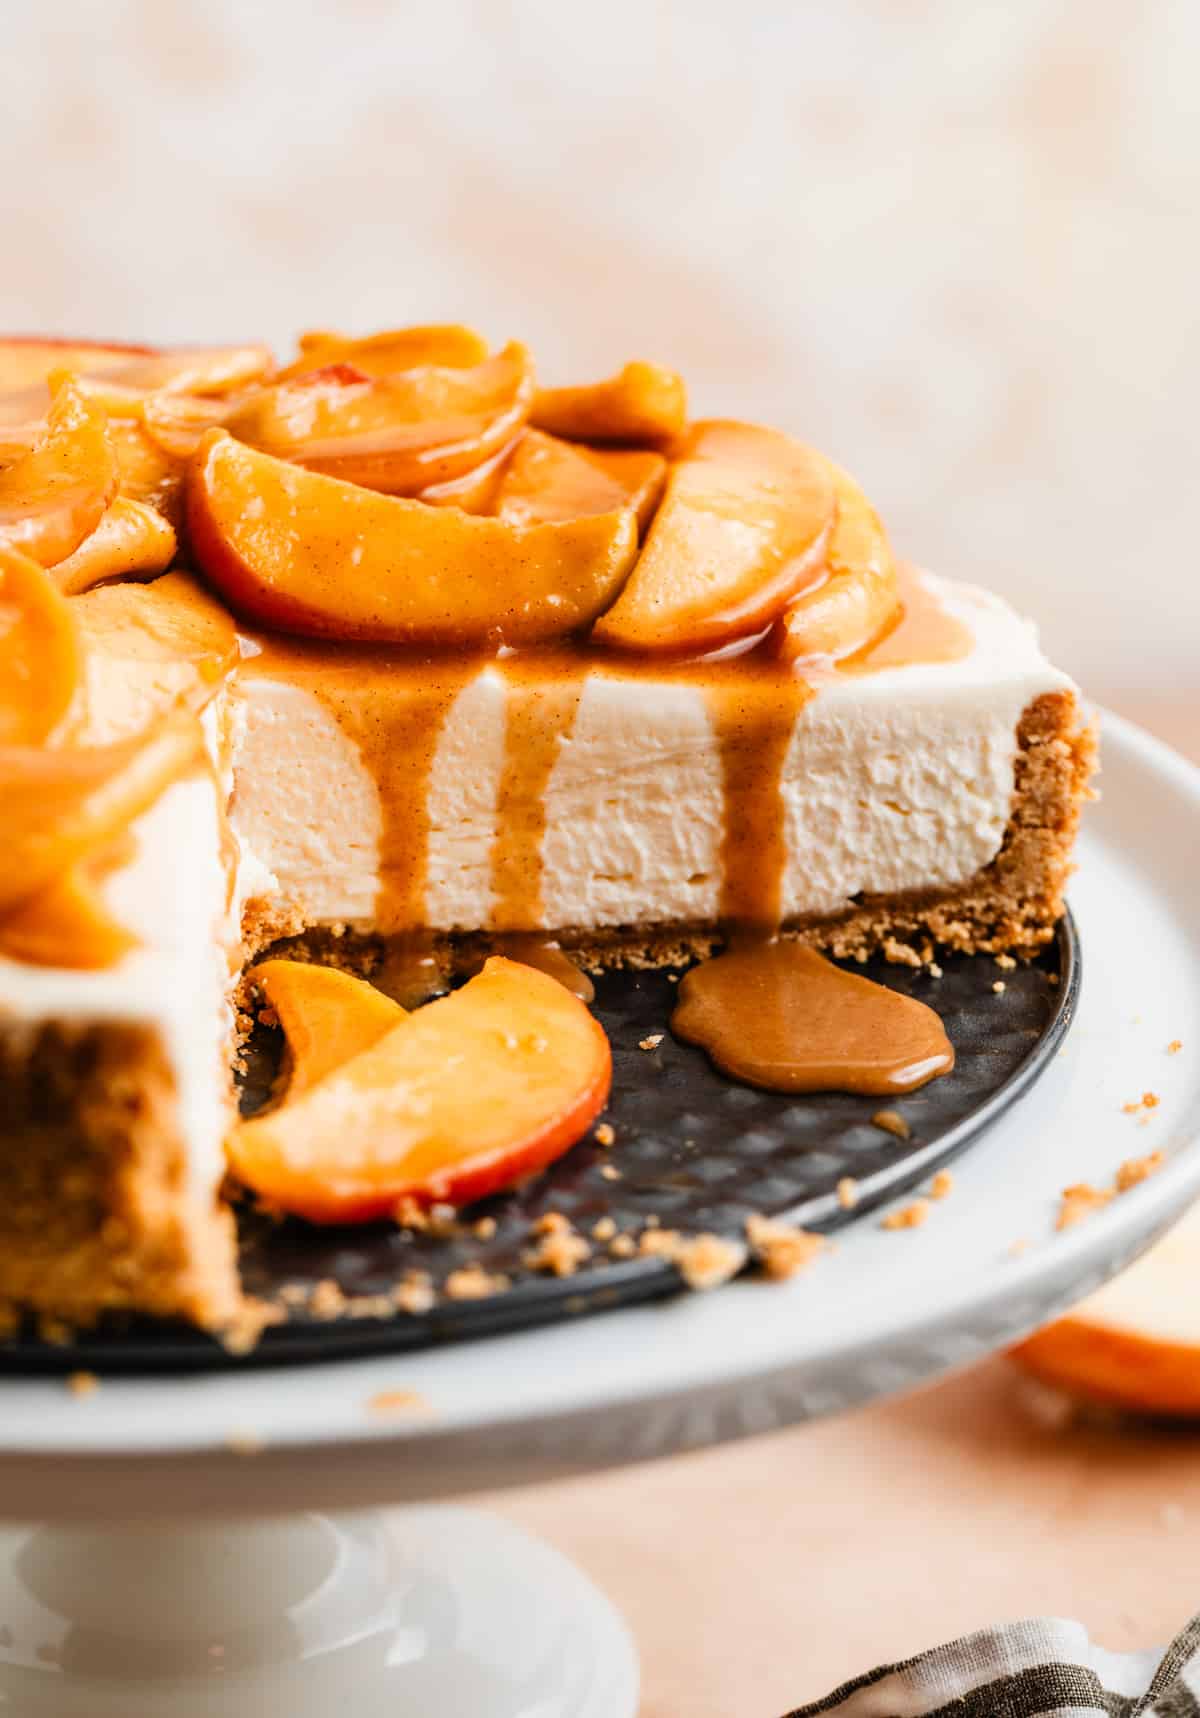 Cheesecake with slice cut out topped with sliced caramel apples and caramel dripping down the sides.